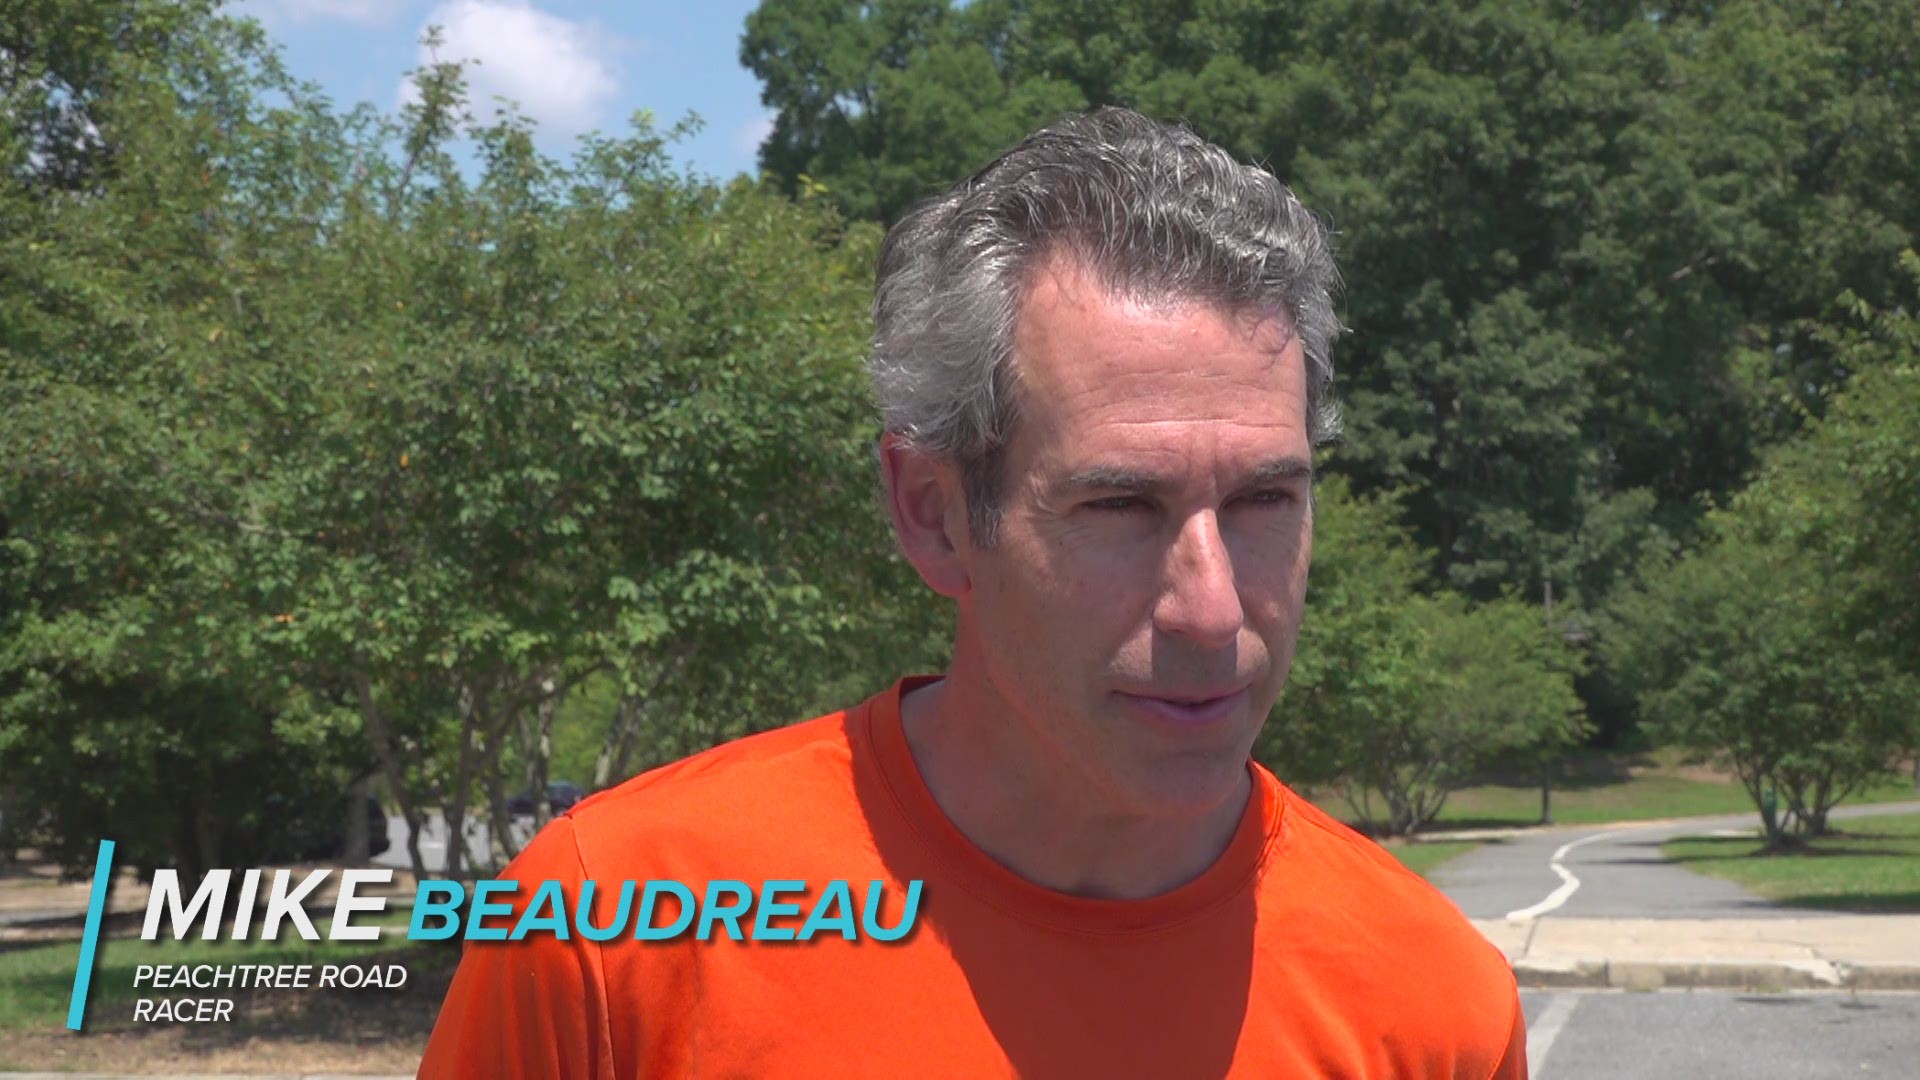 Mike Beaudreau, a local high school track coach, says his 11th AJC Peachtree Road Race is special because he is training for it with former members of his track team.